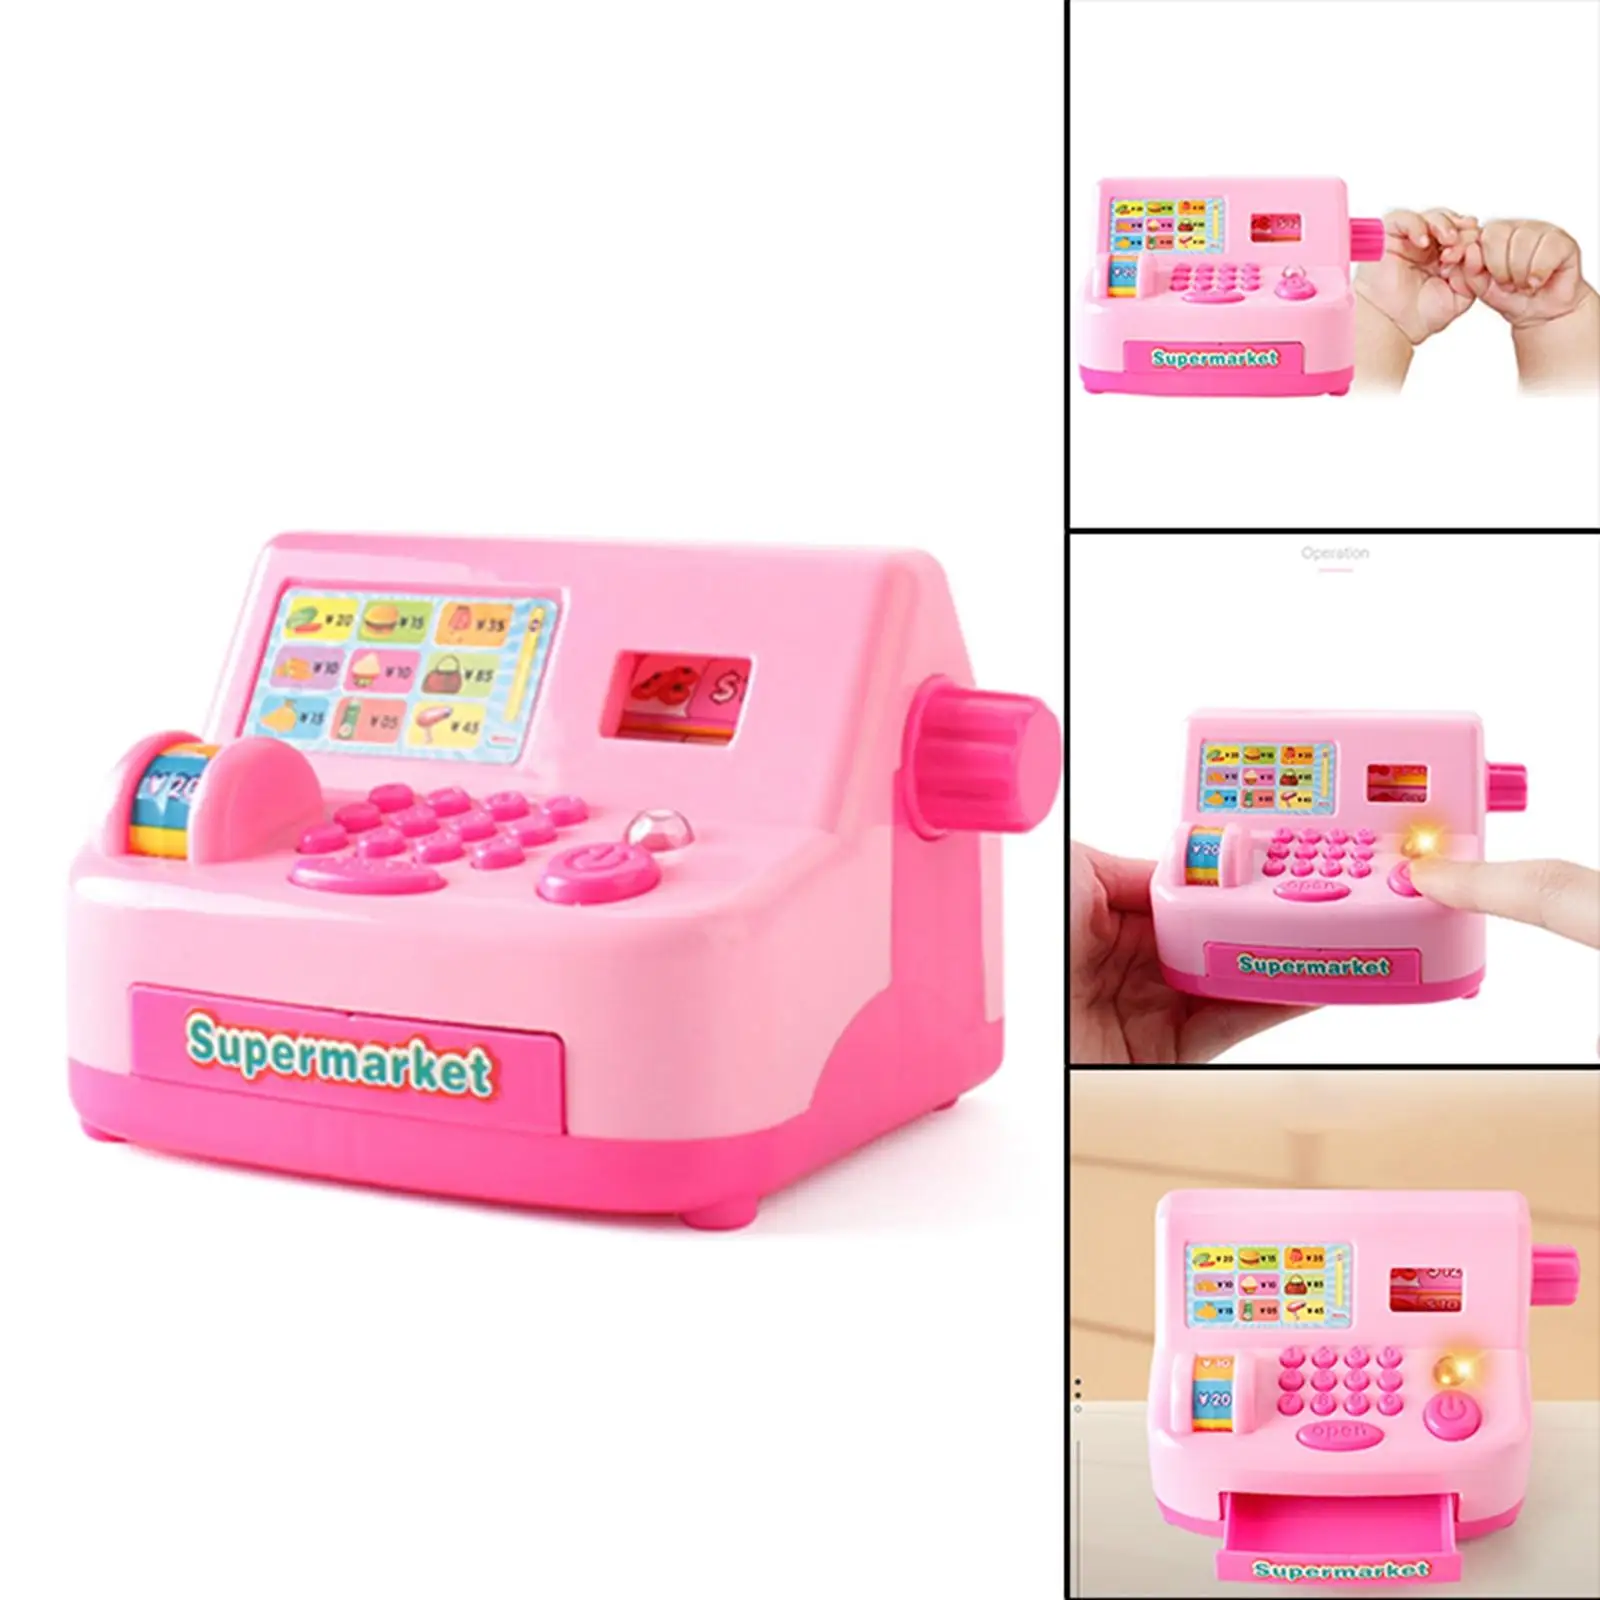 Simulation Cash Register Battery Operated Pretend Play Shopping Cashier for Preschool Kids Age 3 4 5 6 7+ Learning Gift